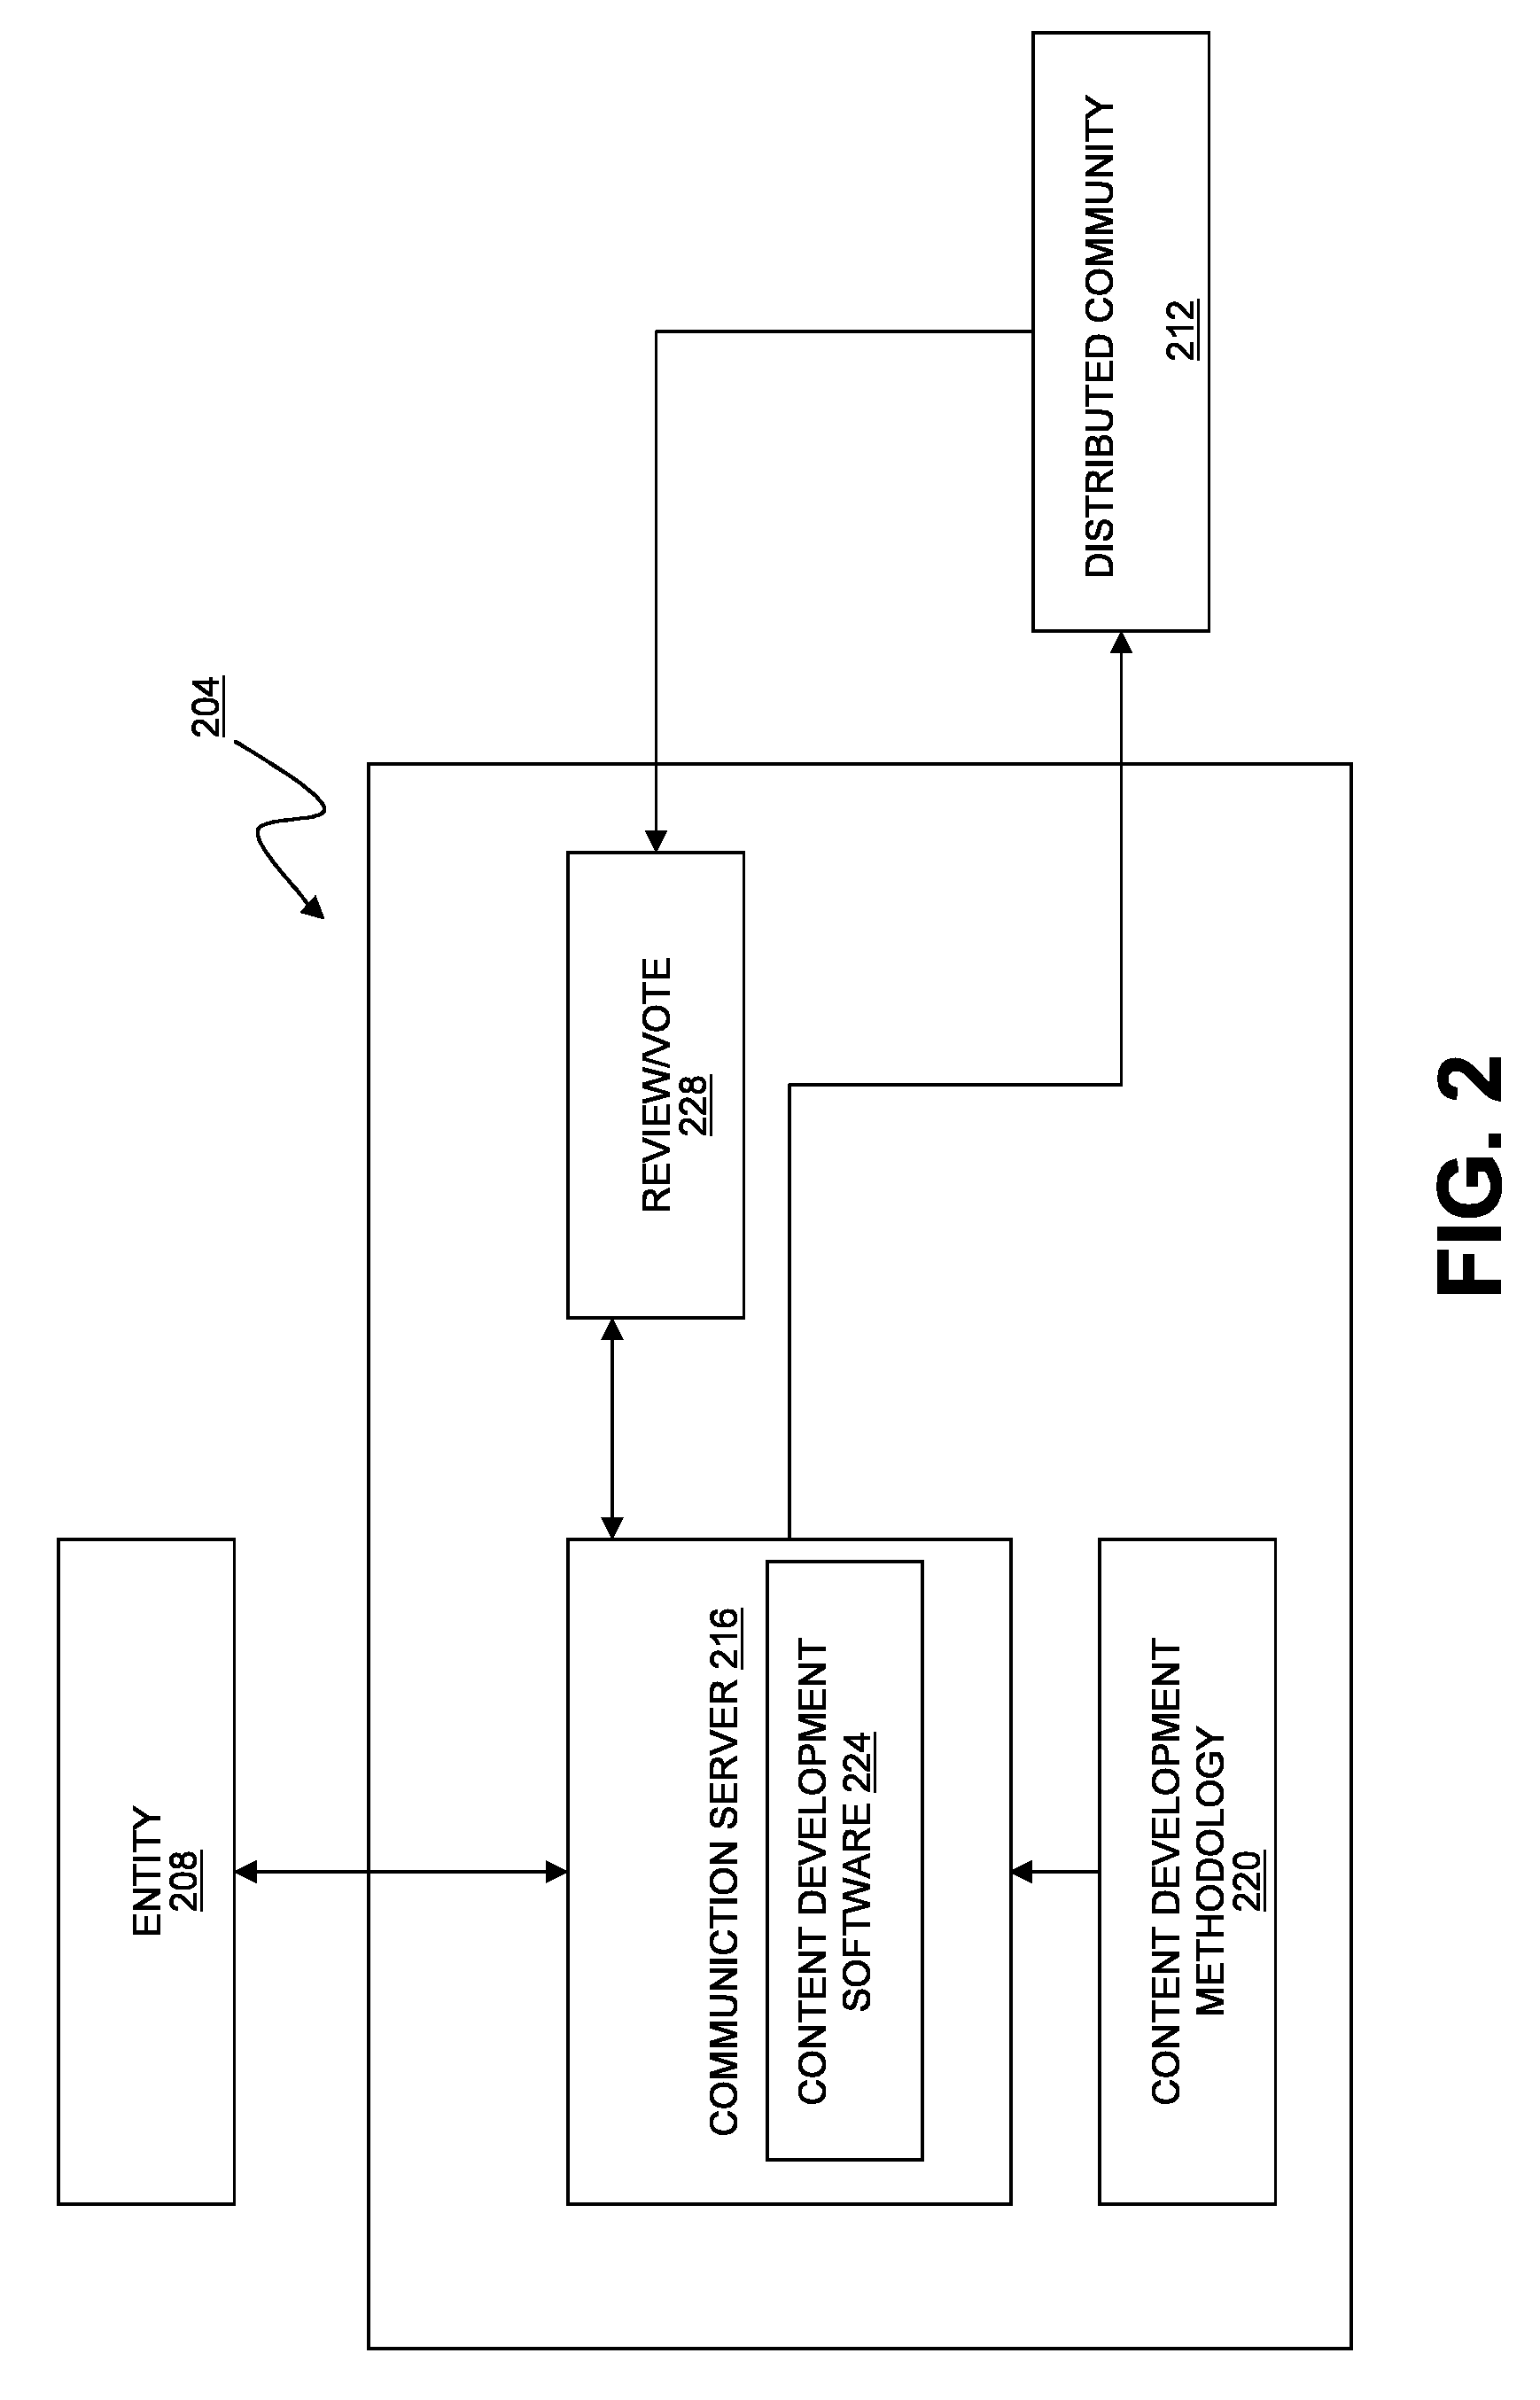 System and Method for Content Development